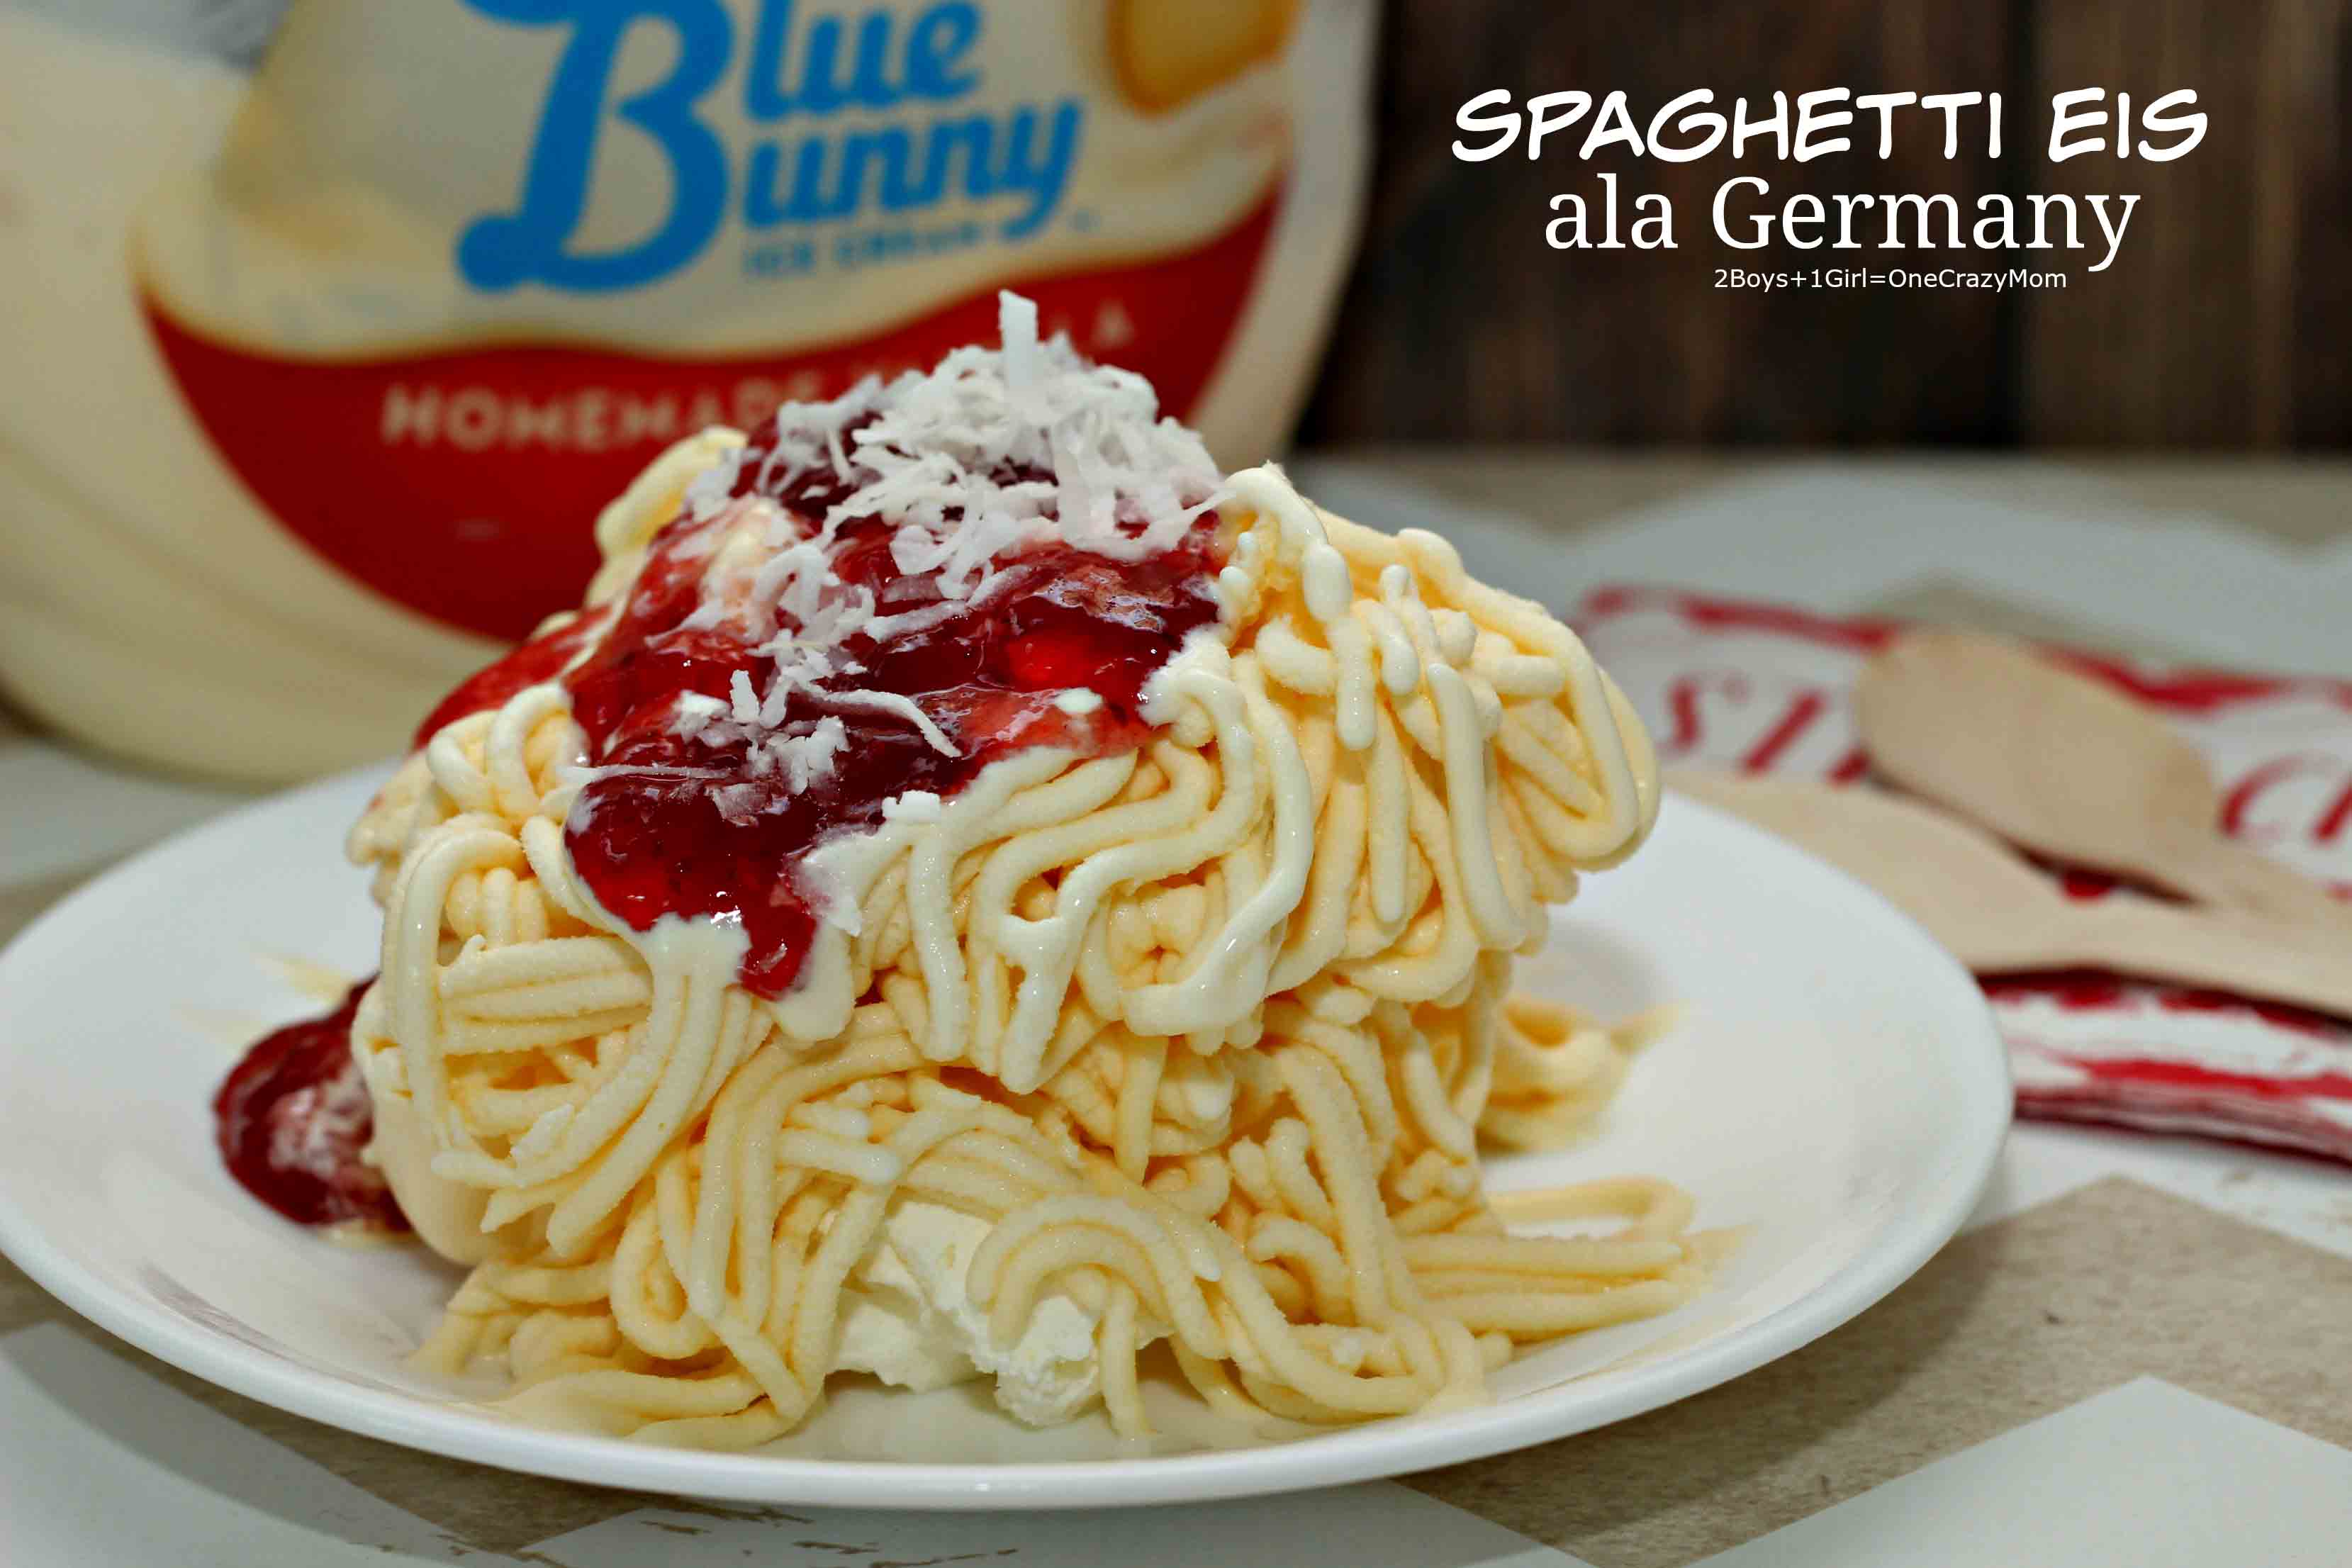 Welcome Summer with a Spagetti Eis Treat